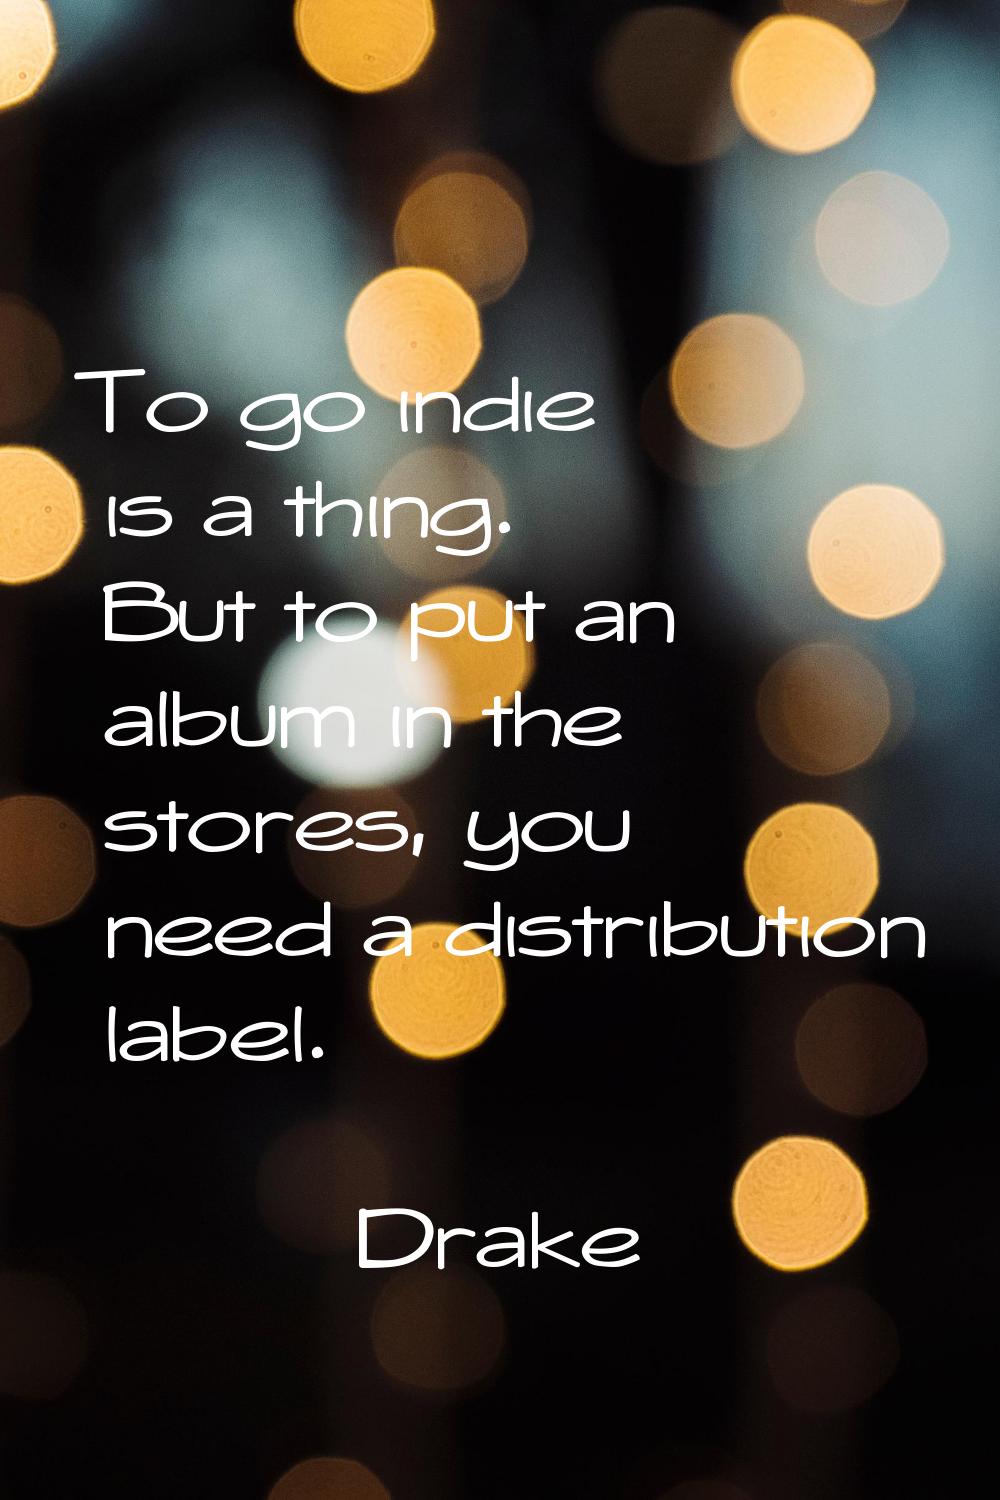 To go indie is a thing. But to put an album in the stores, you need a distribution label.